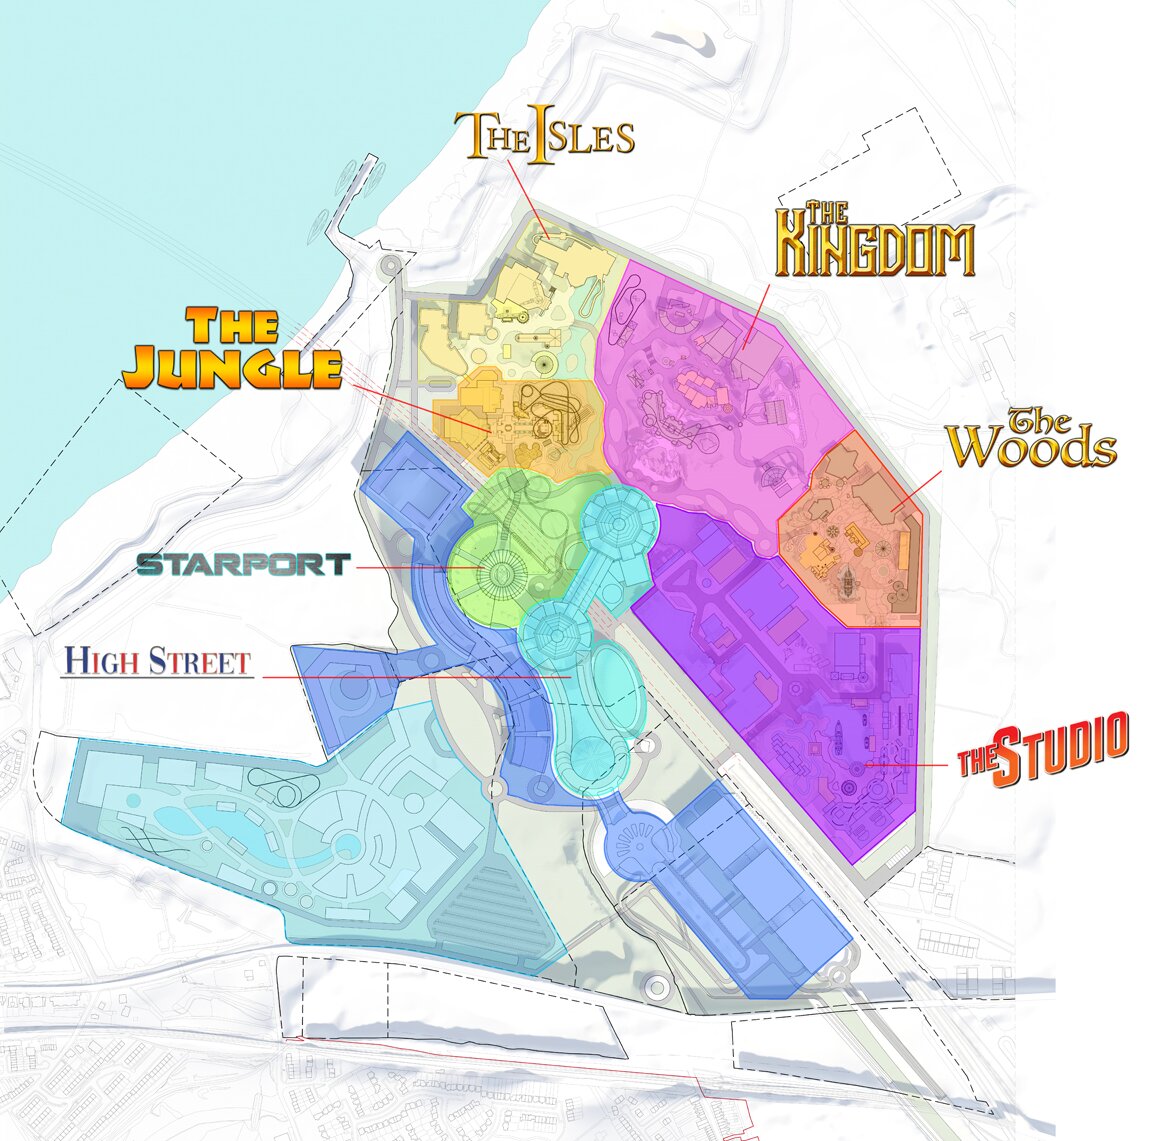 Concept map of The London Resort